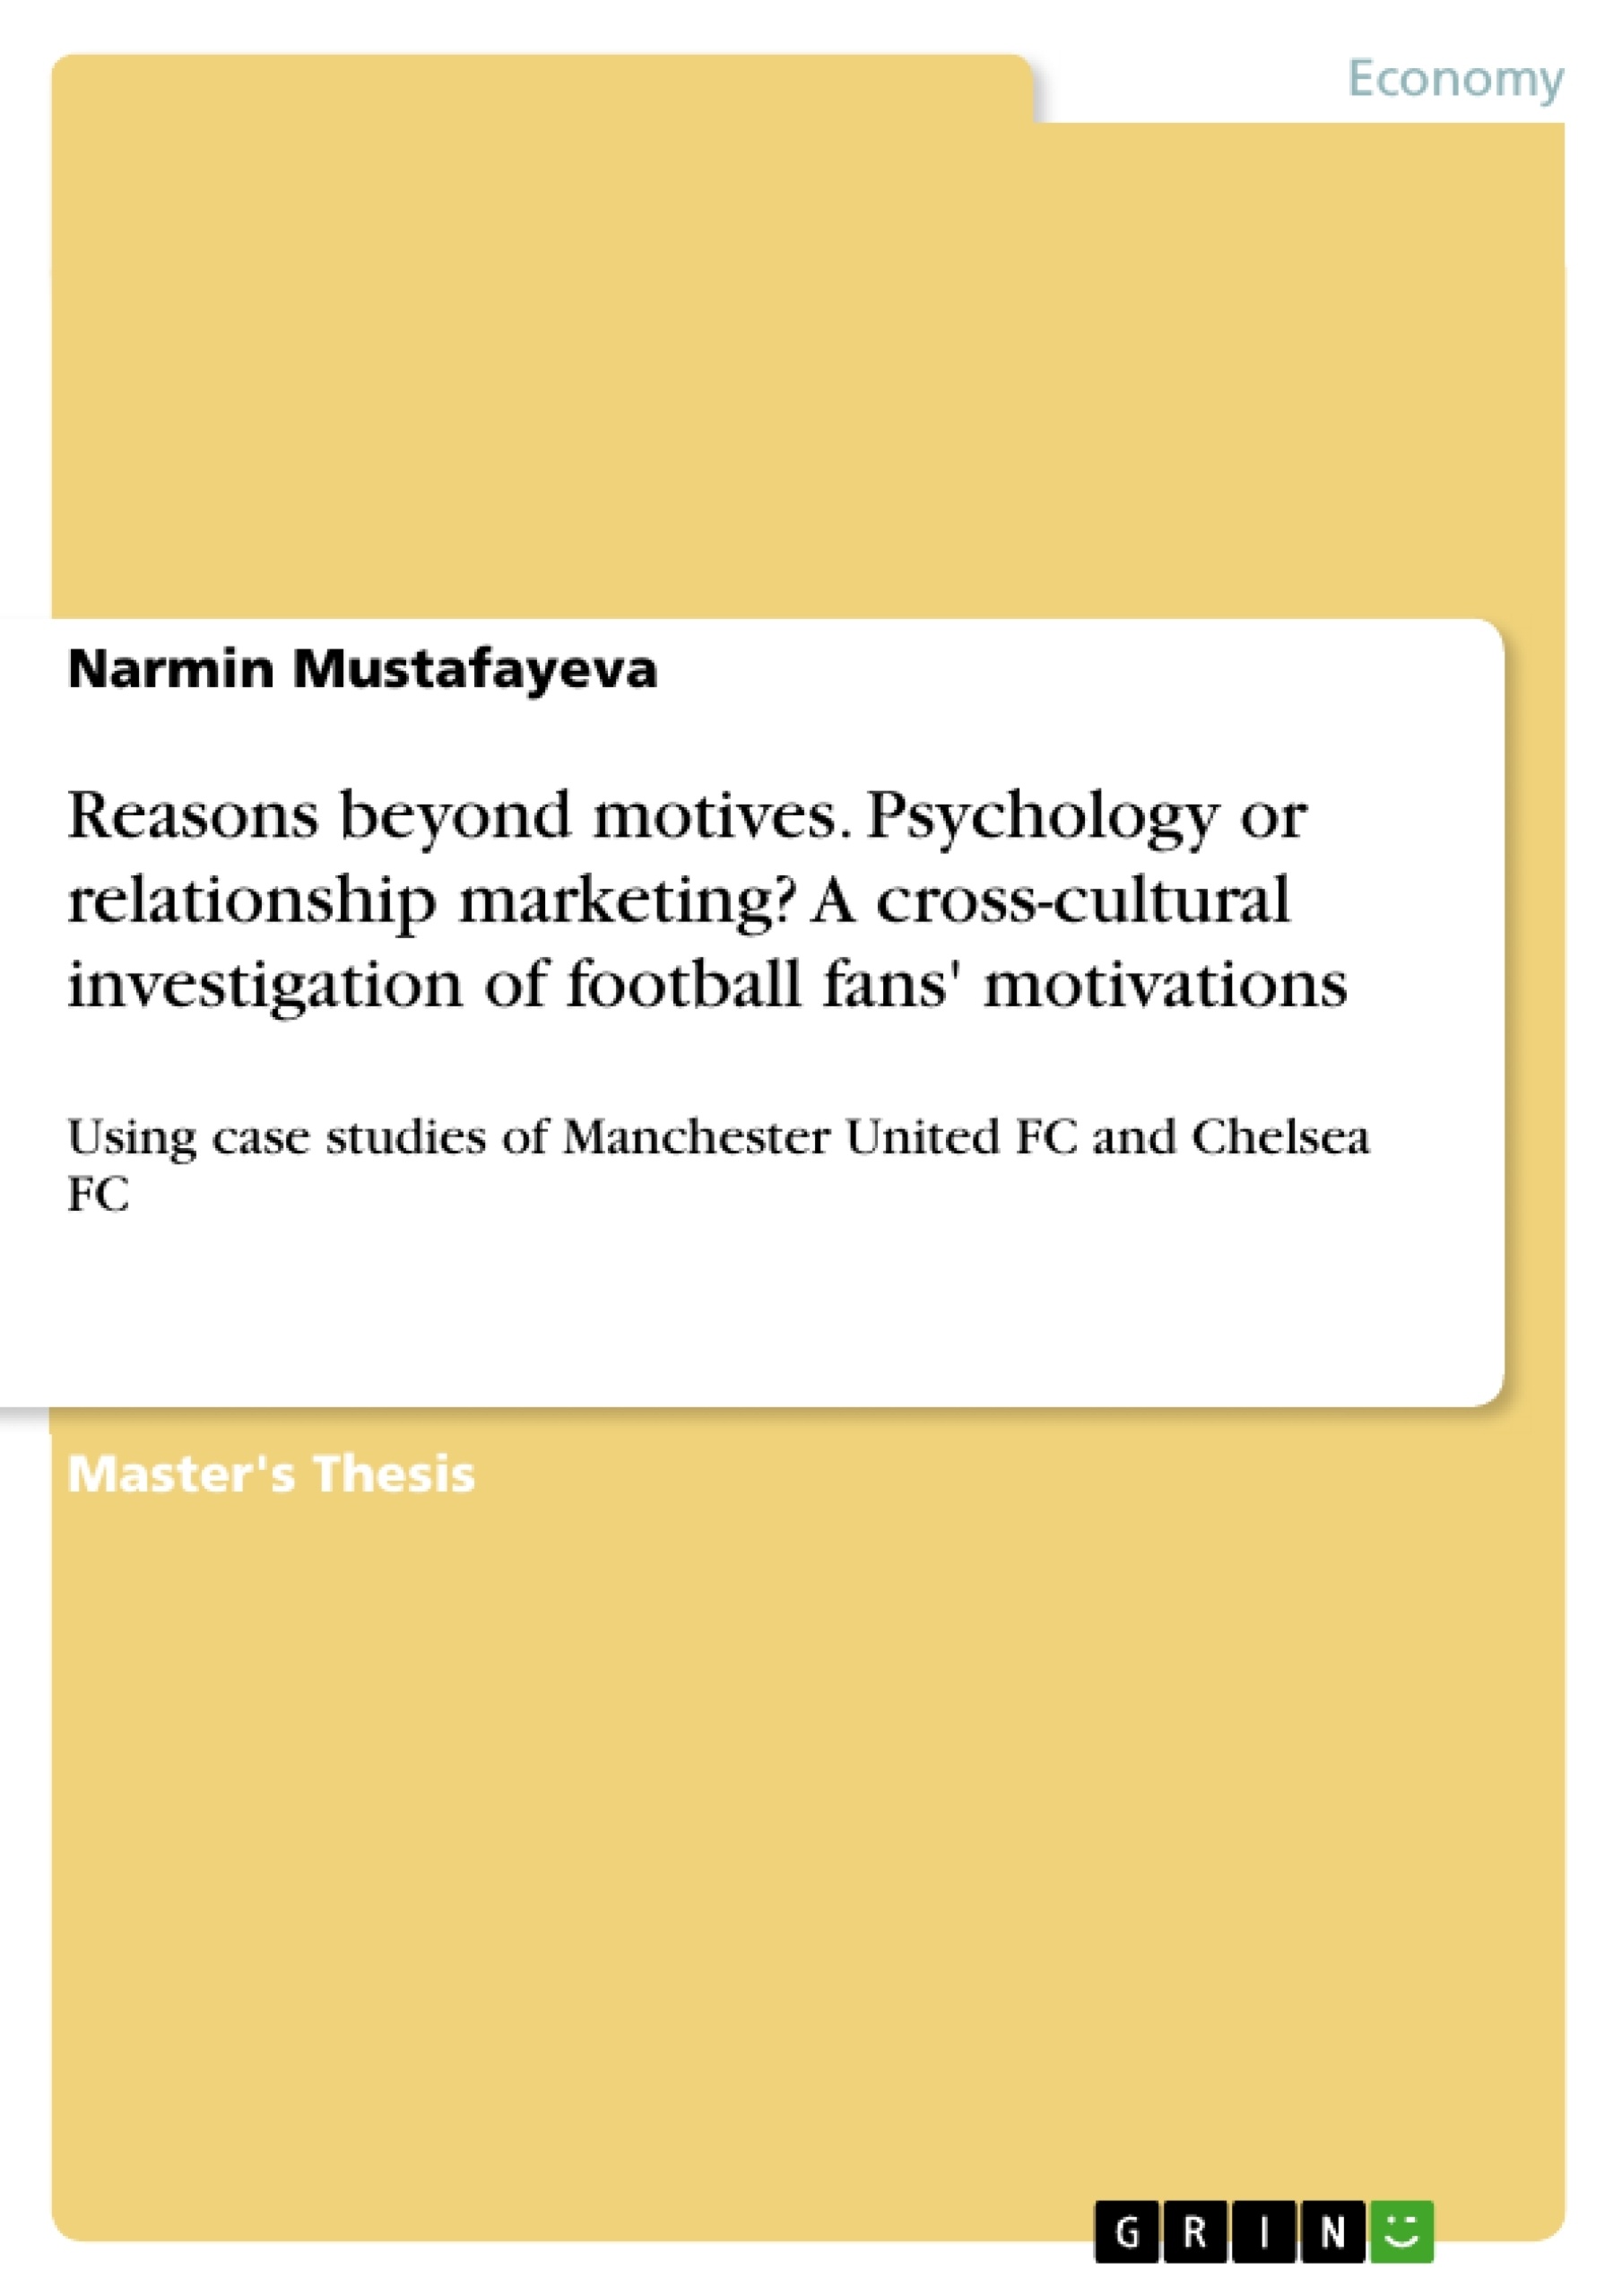 Title: Reasons beyond motives. Psychology or relationship marketing? A cross-cultural investigation of football fans' motivations